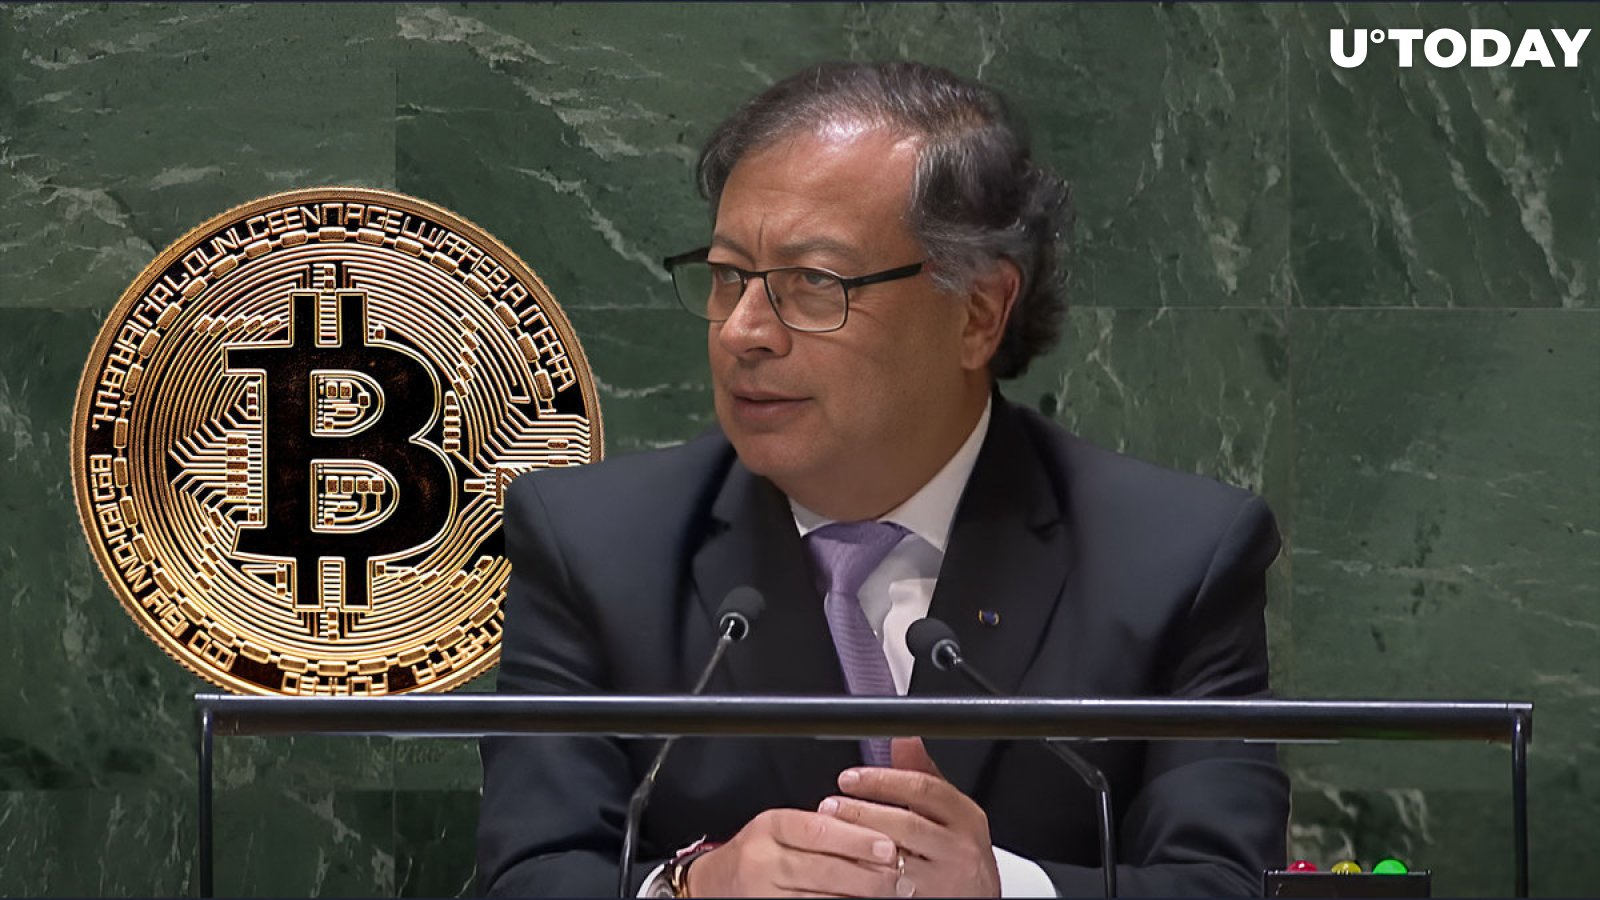 President of Colombia Becomes Bitcoin (BTC) Holder